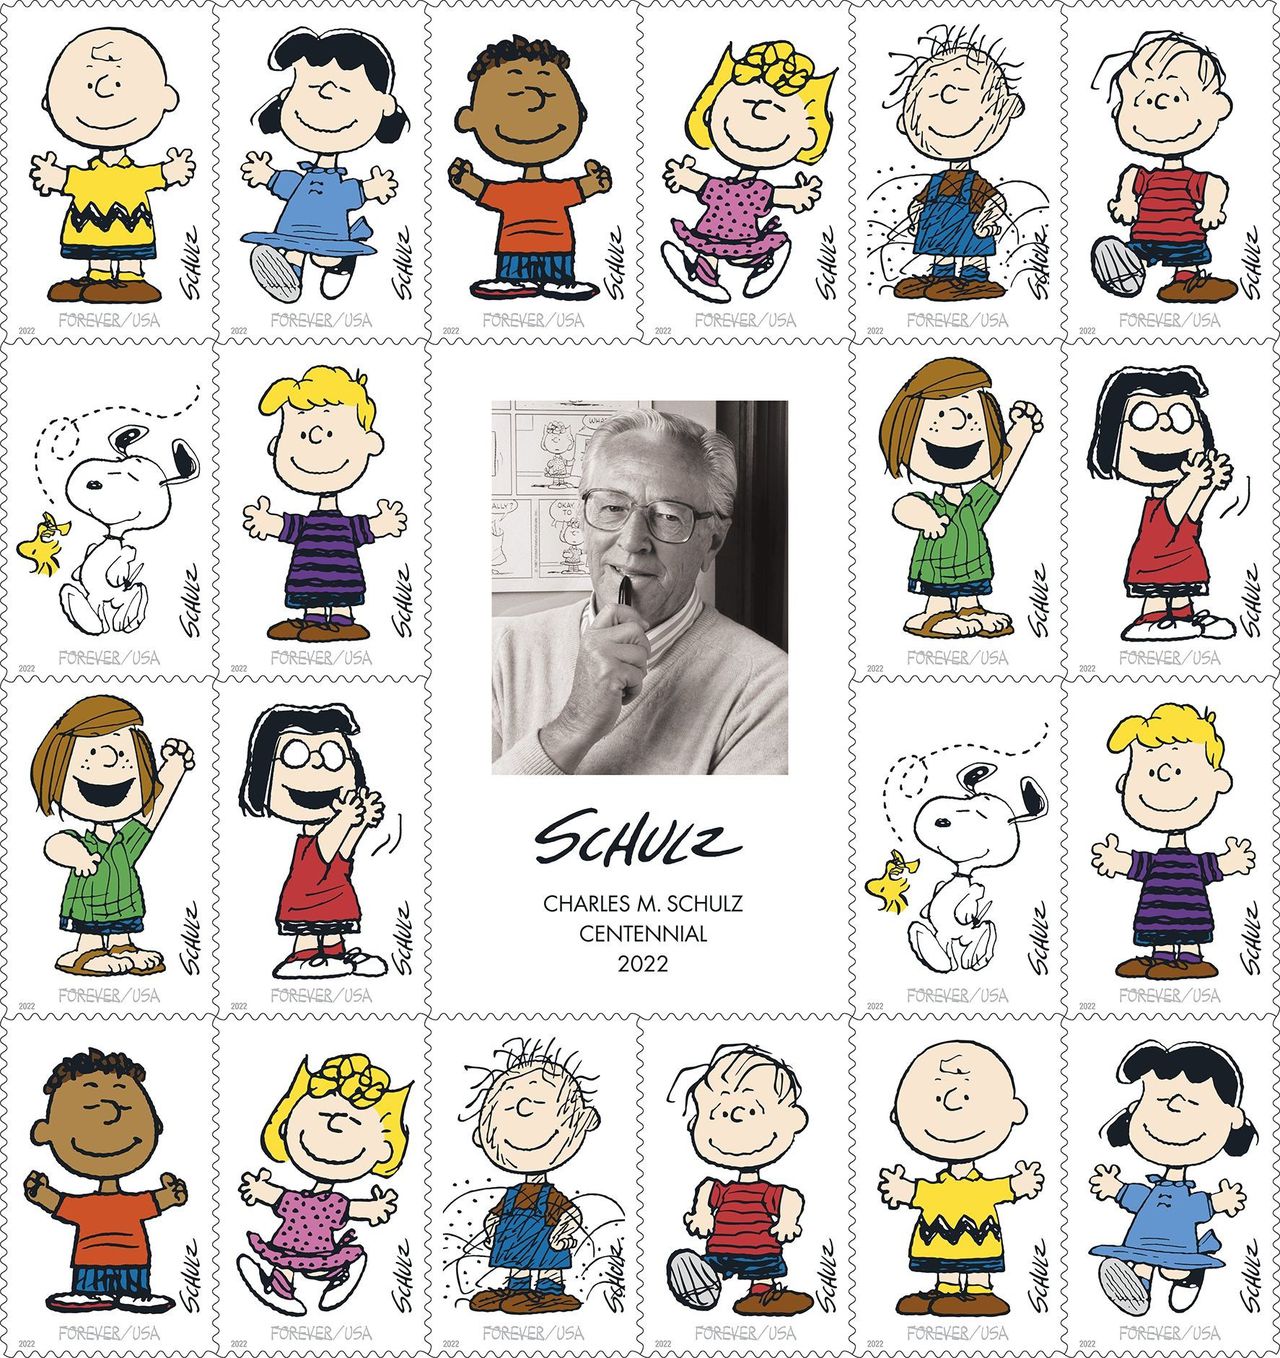 USPS Charles Schulz "Peanuts" Forever Stamps - Booklet of 20 Postage Stamps